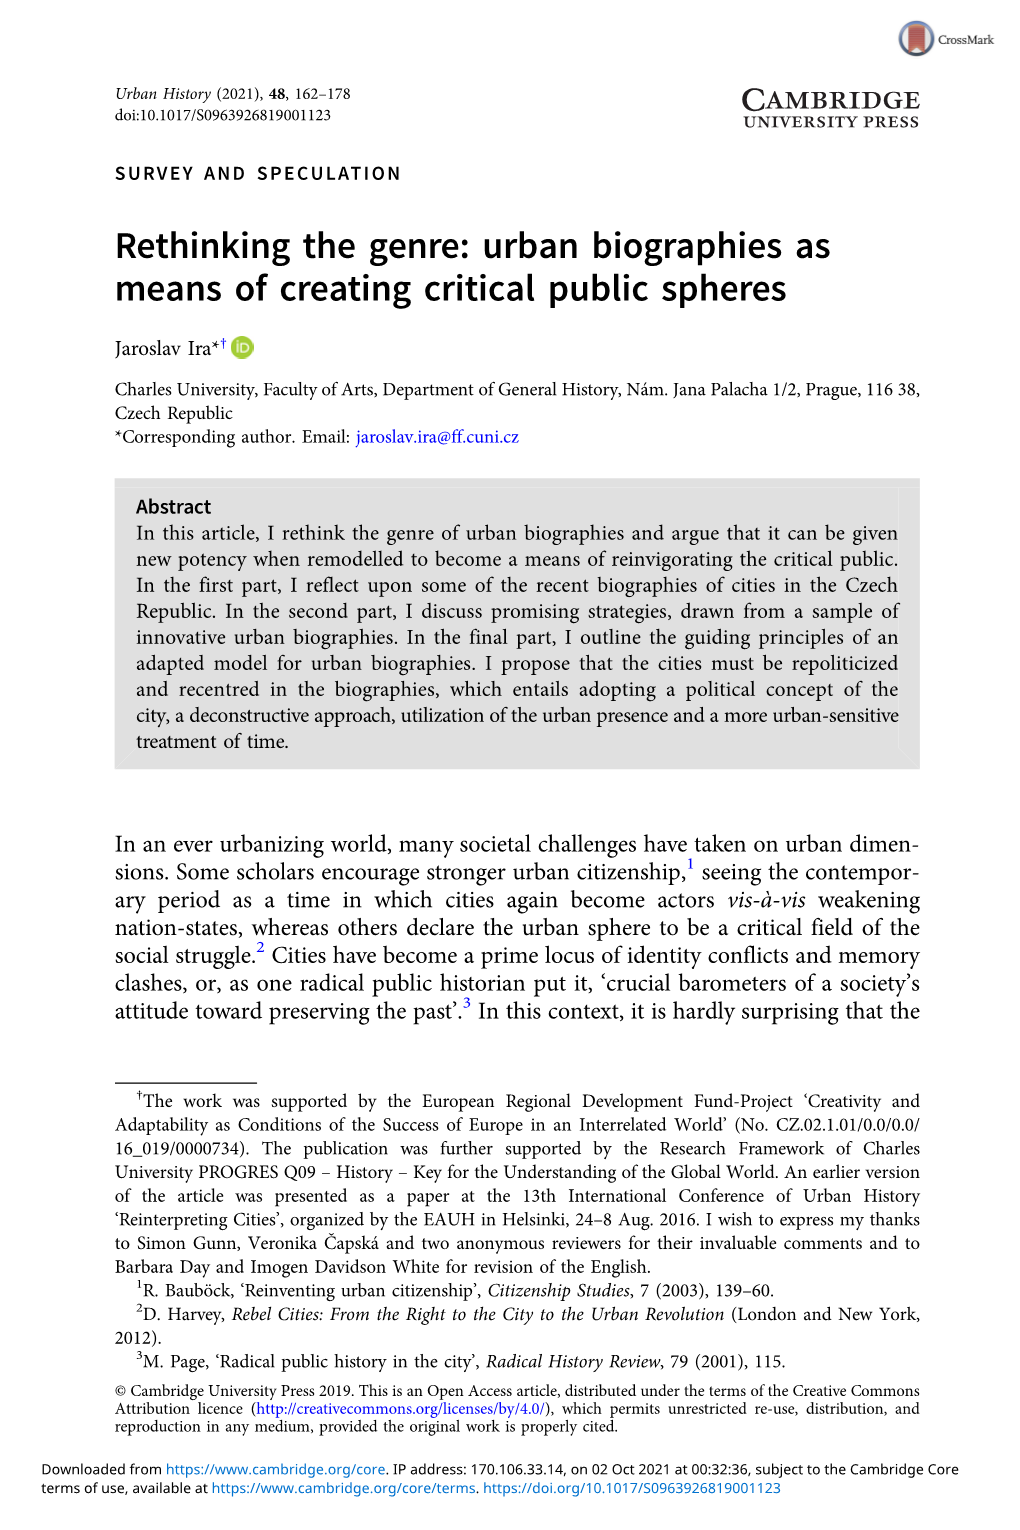 Rethinking the Genre: Urban Biographies As Means of Creating Critical Public Spheres